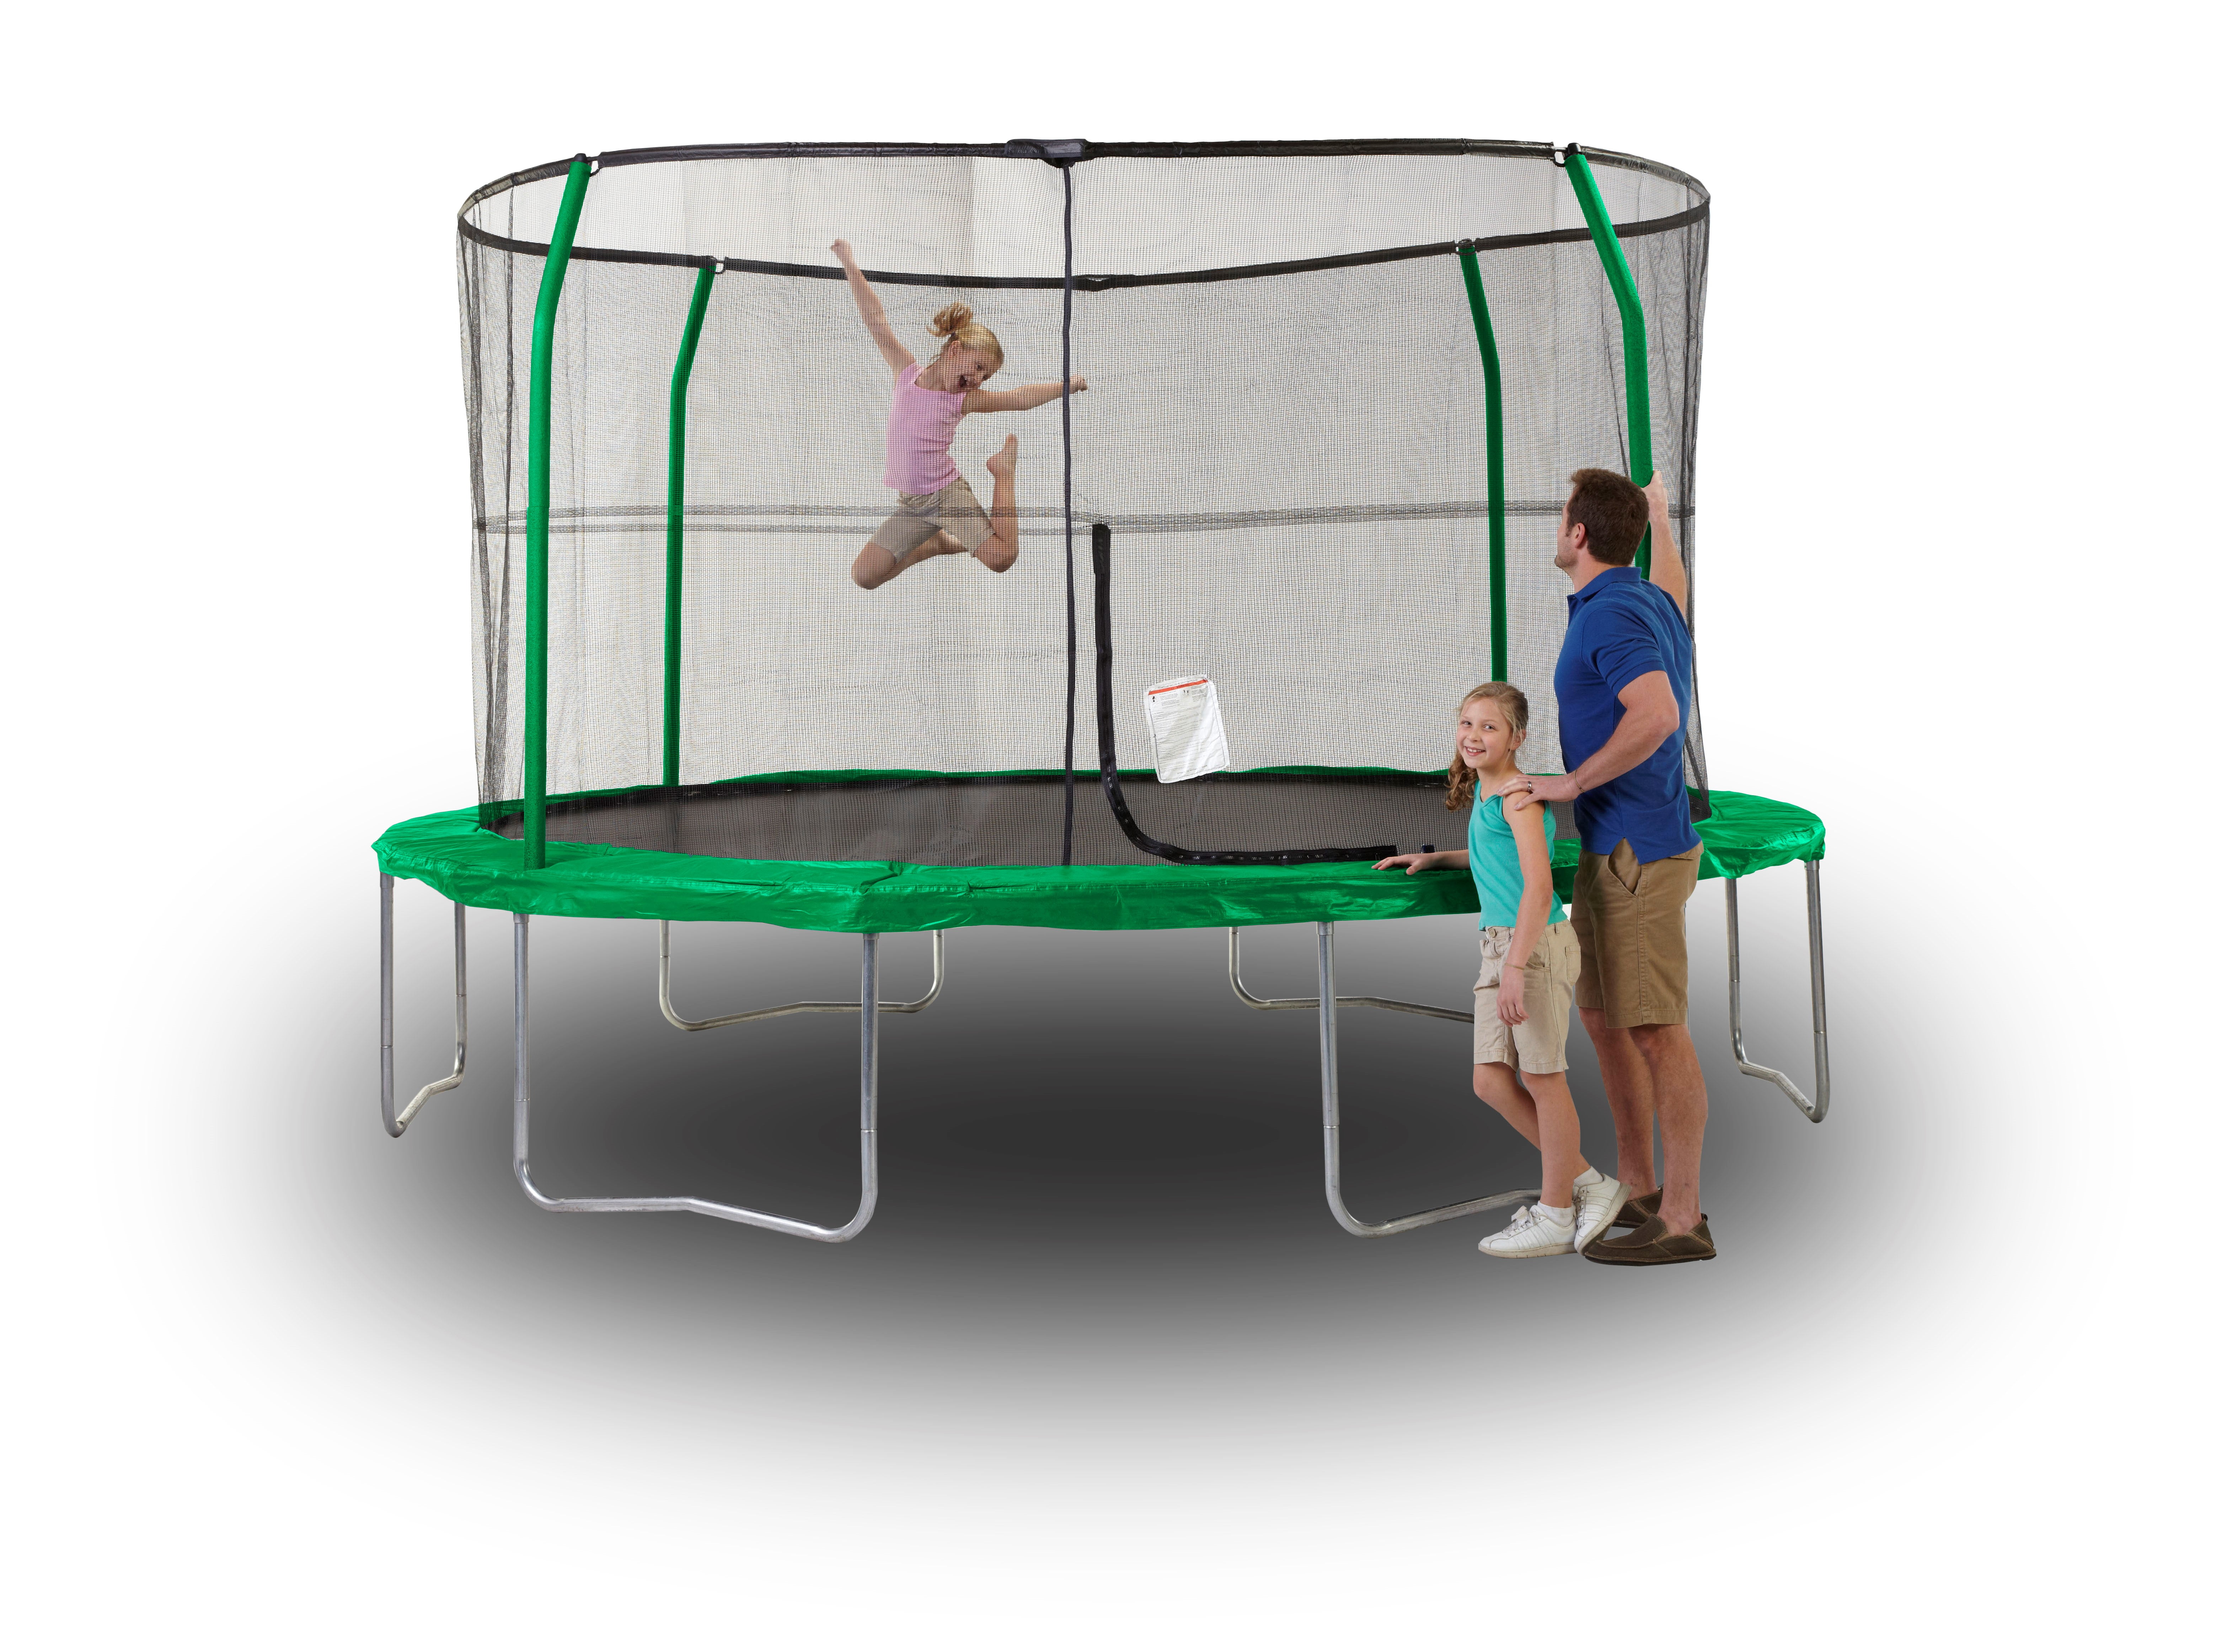 Orbounder 14' Trampoline with Enclosure, Green – Walmart Inventory ...